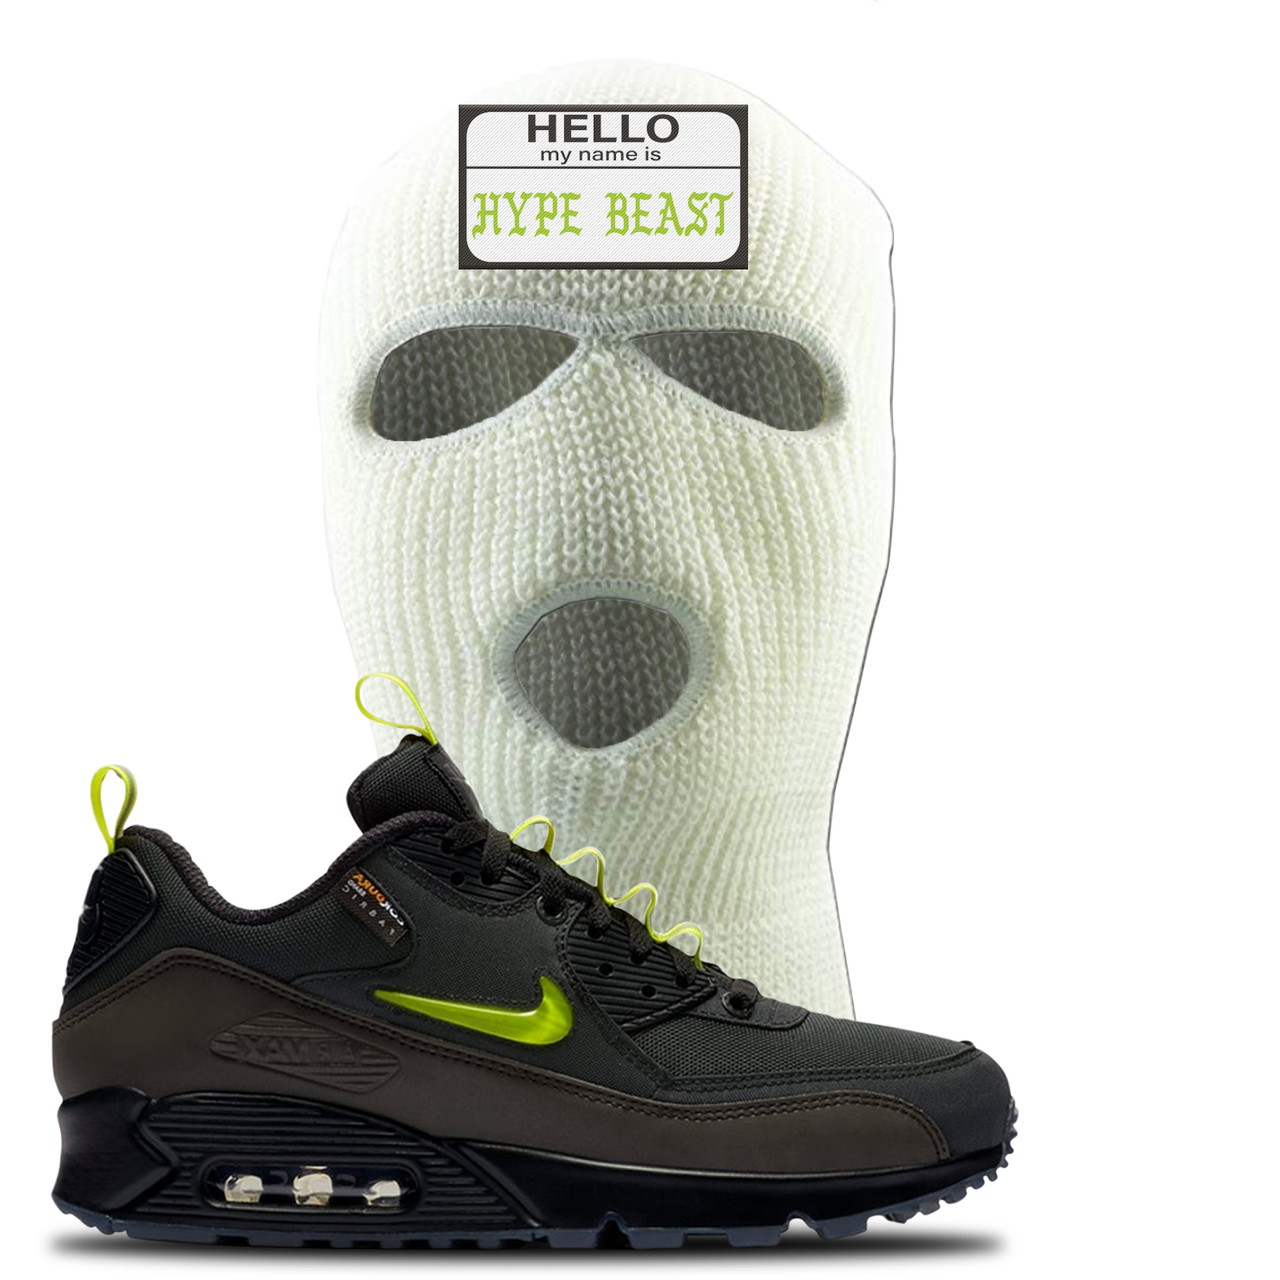 The Basement X Air Max 90 Manchester Hello My Name is Hype Beast White Sneaker Hook Up Ski Mask